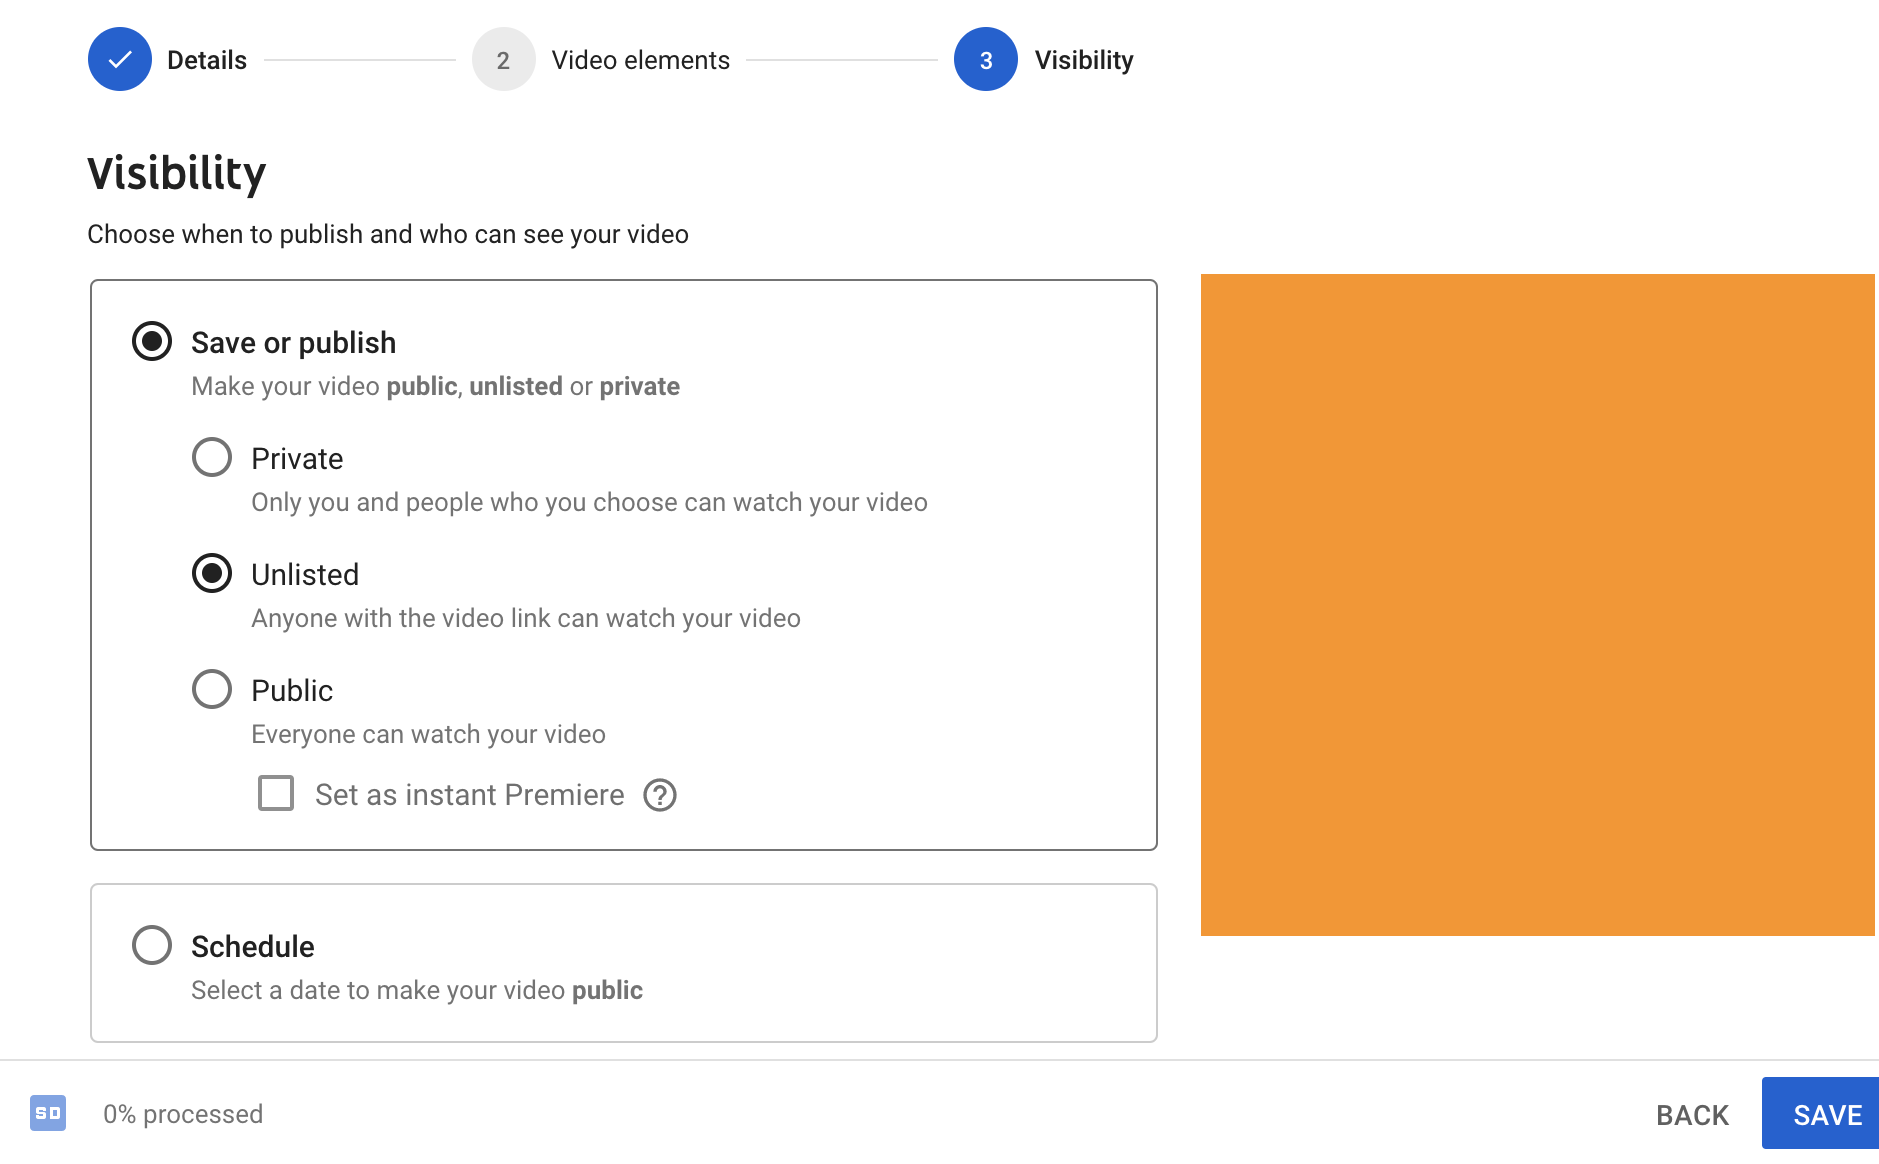 how to gate video content on youtube using unlisted video settings - Pearce Marketing